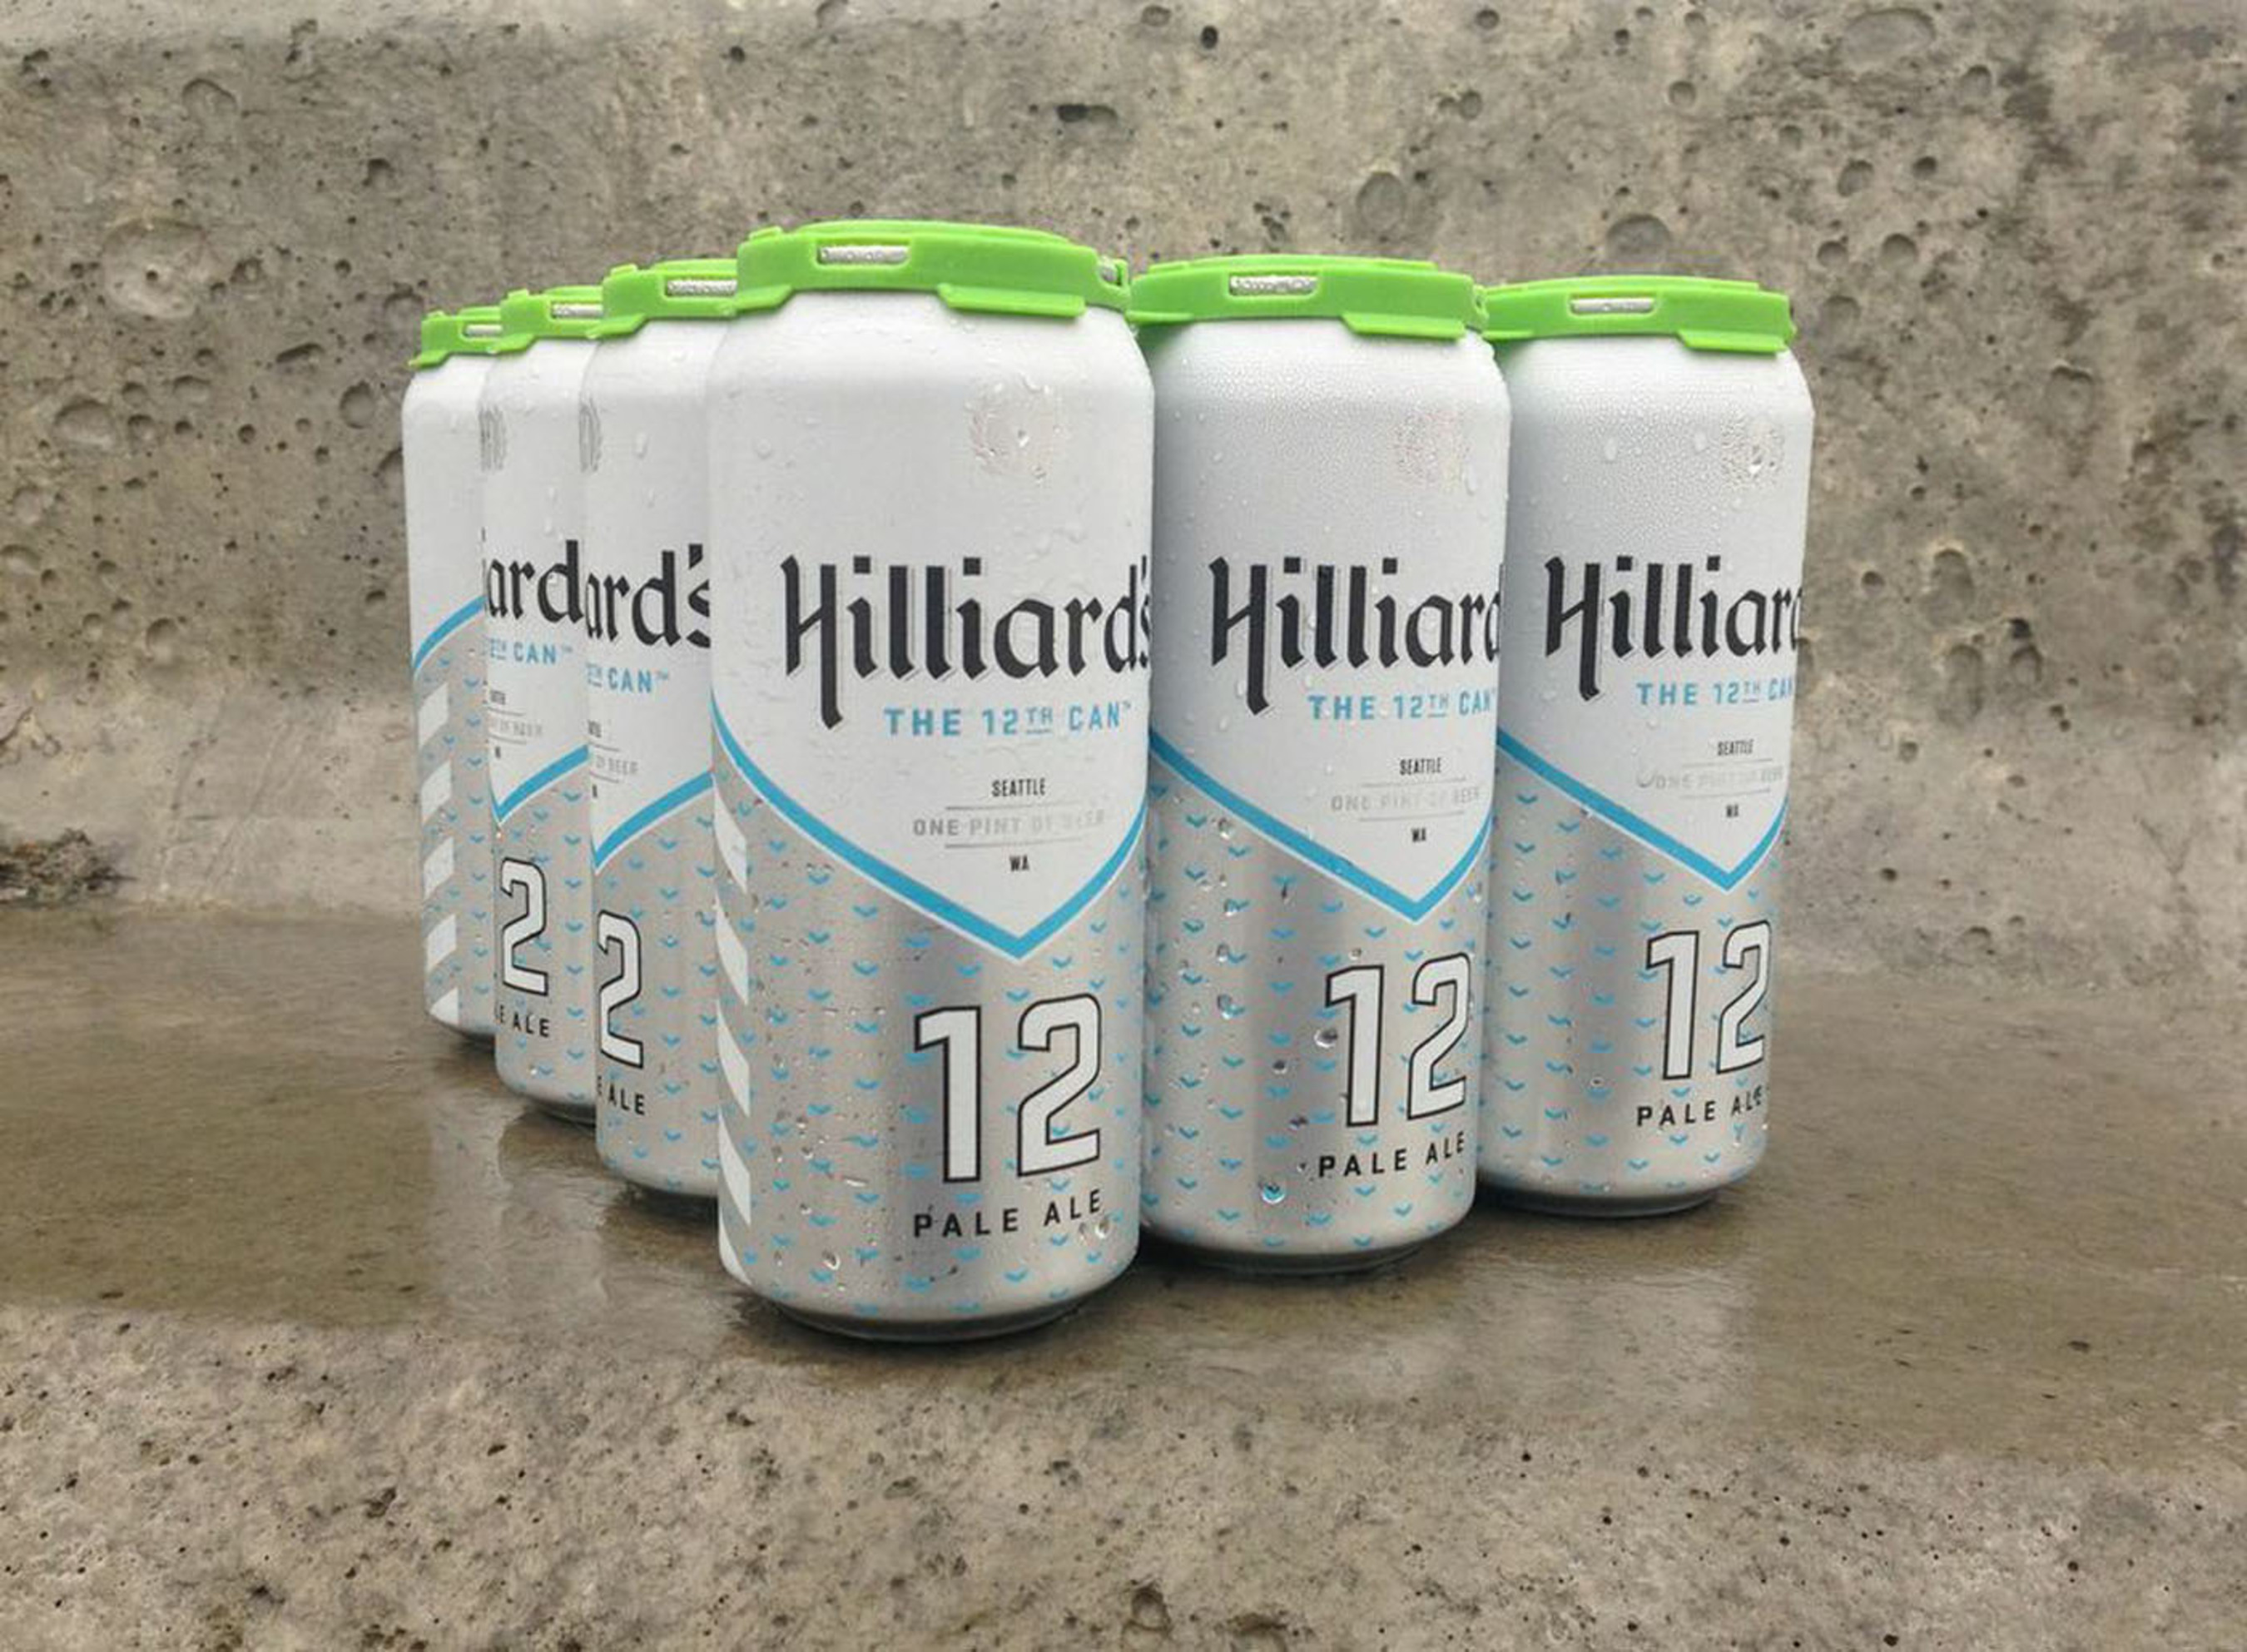 In an auspicious twist of fate, and months before the Seattle Seahawks hit the NFL playoffs, Seattle's Hilliard's Beer crafted a one-of-a-kind, seasonal pale ale in tribute to Seattle's famous "12th Man" fan base. Now, as the Seattle team preps for what the franchise hopes to be their first Super Bowl victory, Hilliard's Beer is proud to have created the ultimate football watching beer for the ultimate fans. 'The 12th Can' is the football lovers right hand can. (PRNewsFoto/Hilliard's Beer) (PRNewsFoto/HILLIARD'S BEER)